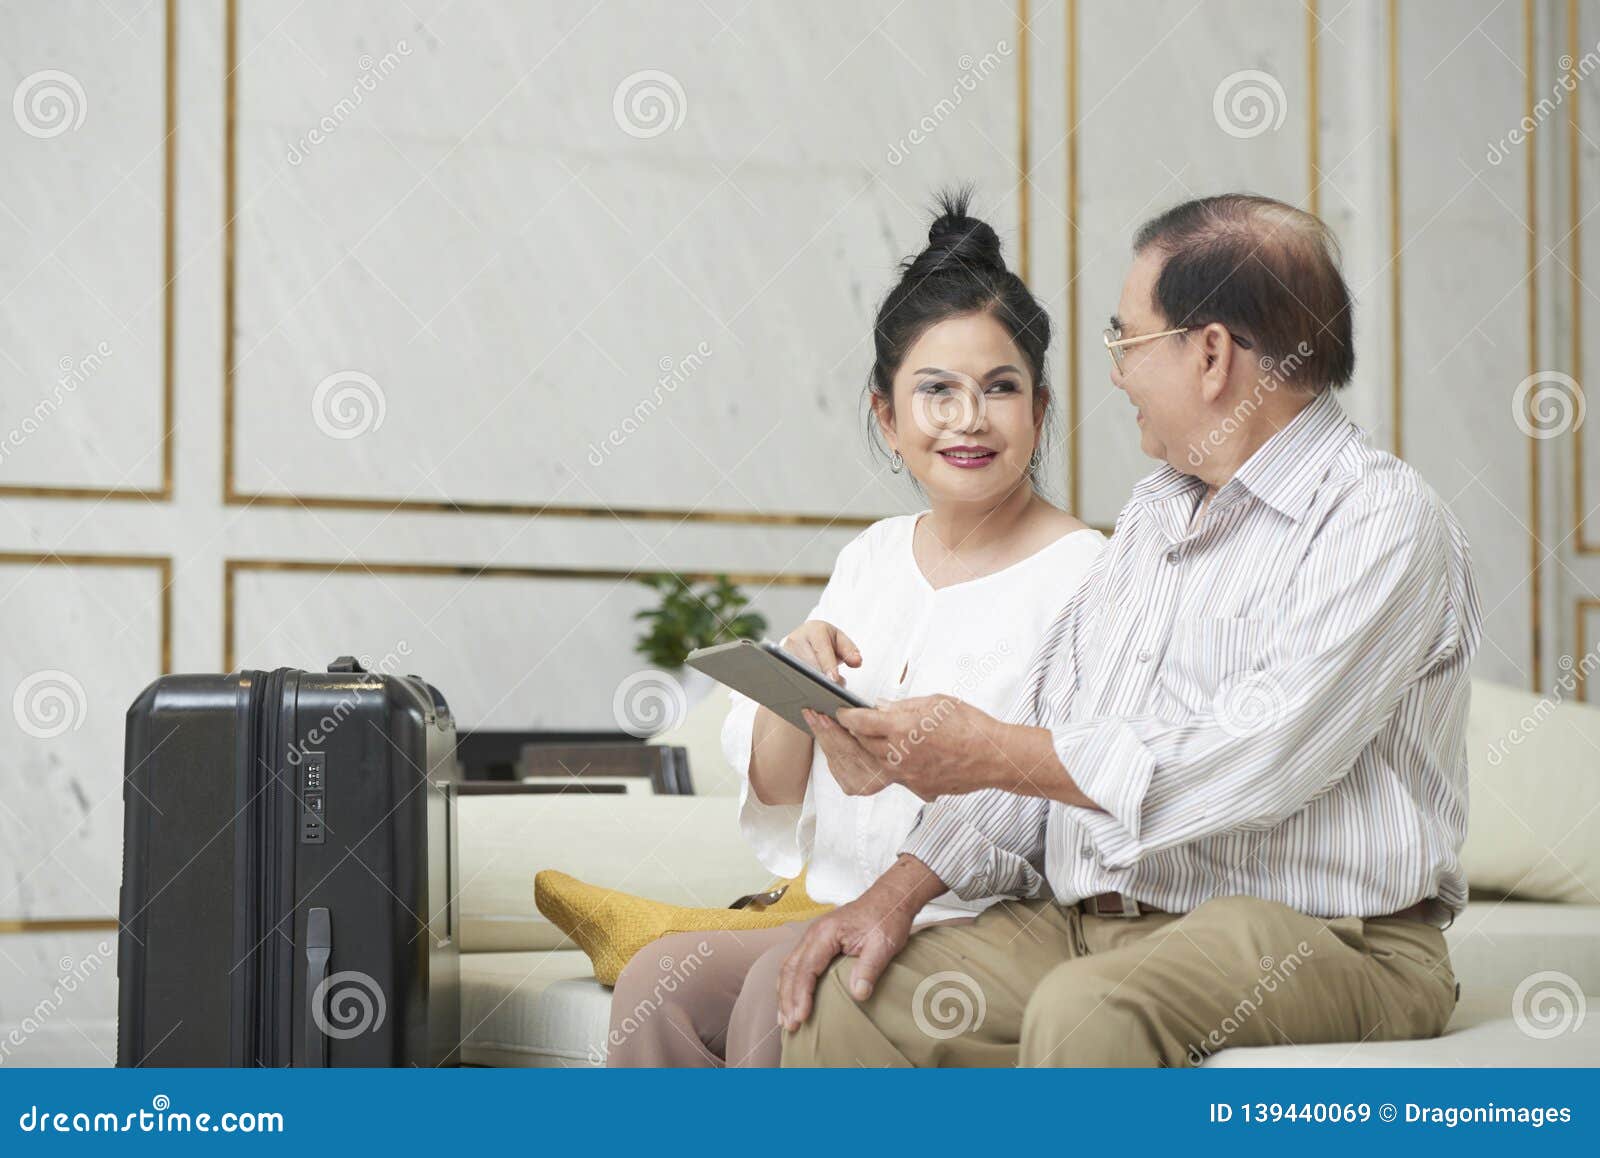 Senior Couple In Hotel Lobby Stock Image Image Of Hall Smiling